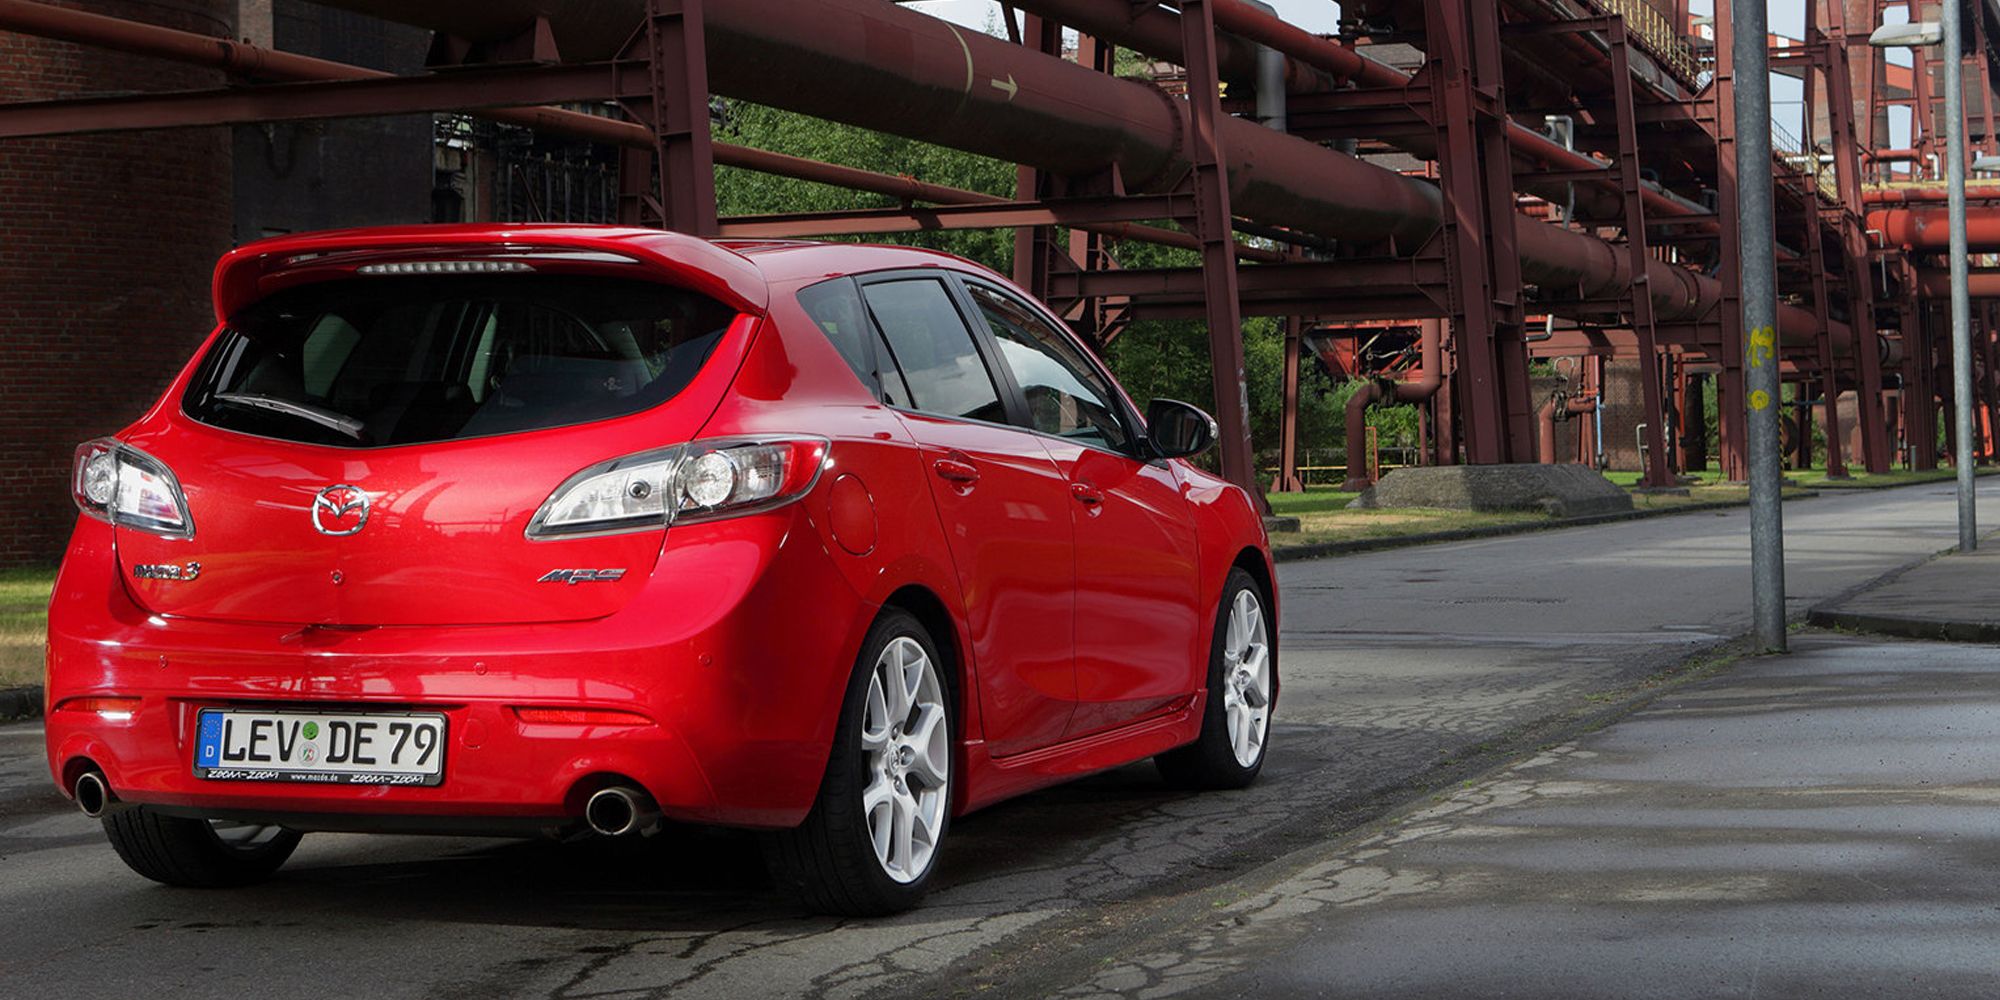 The rear of the Mazdaspeed 3